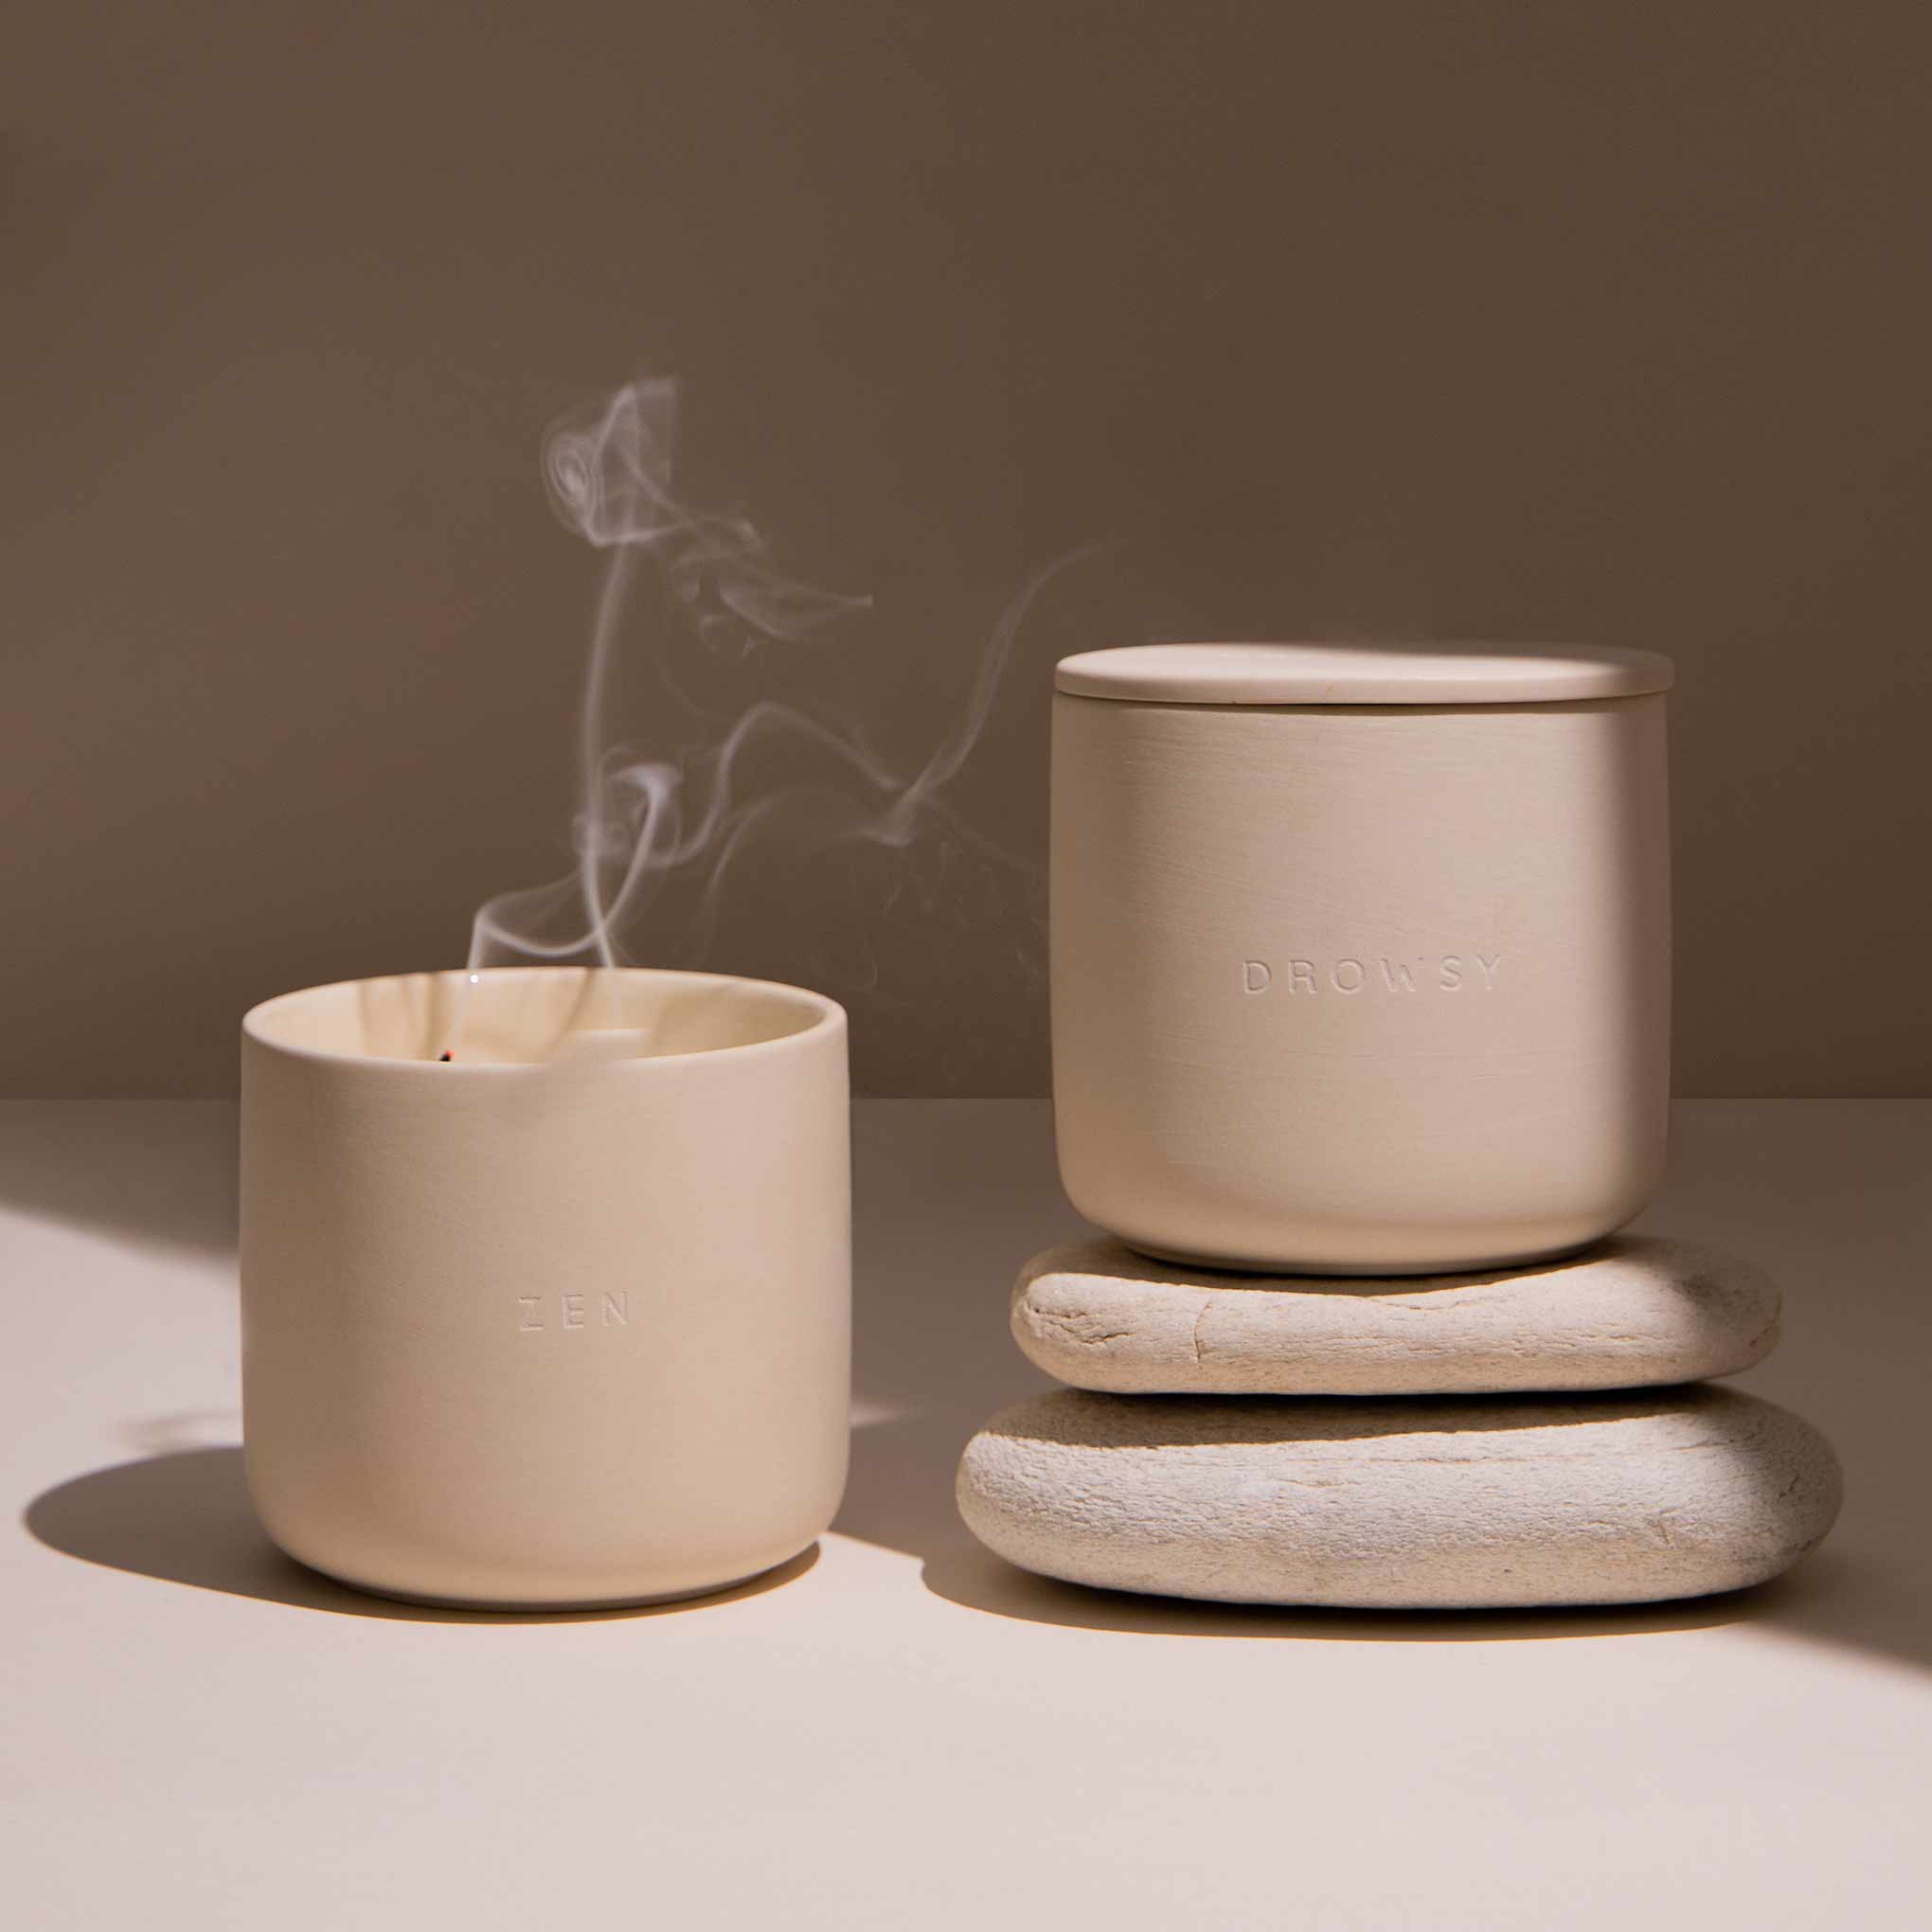 2 Candles in ceramic jars on a cream coloured background. One of them has just been blown out and has smoke gently rising from the wick.